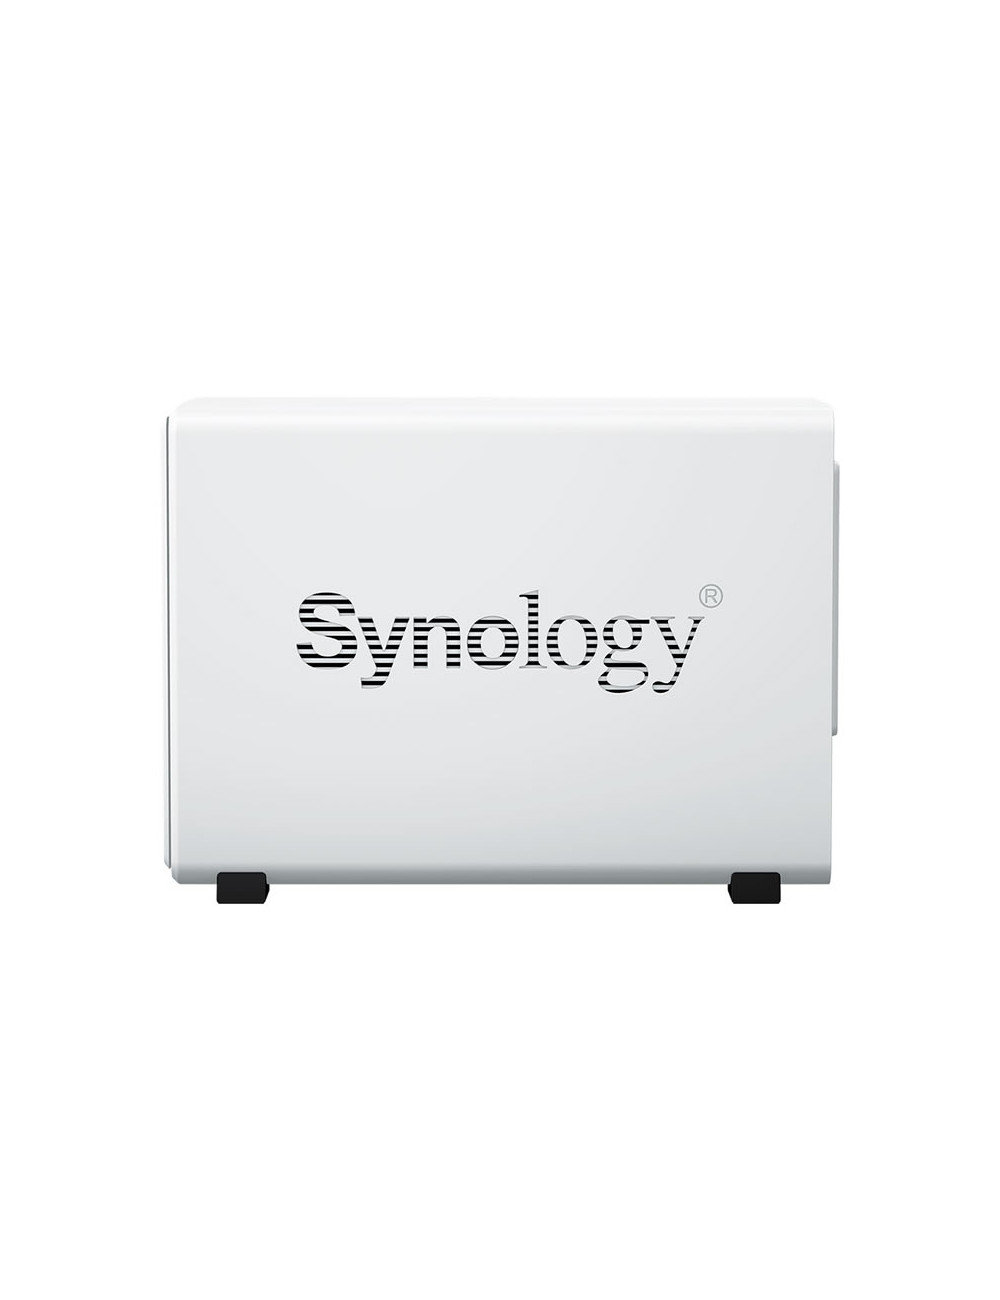 Synology DS220+ 6Go Serveur NAS SKYHAWK 12To (2x6To)